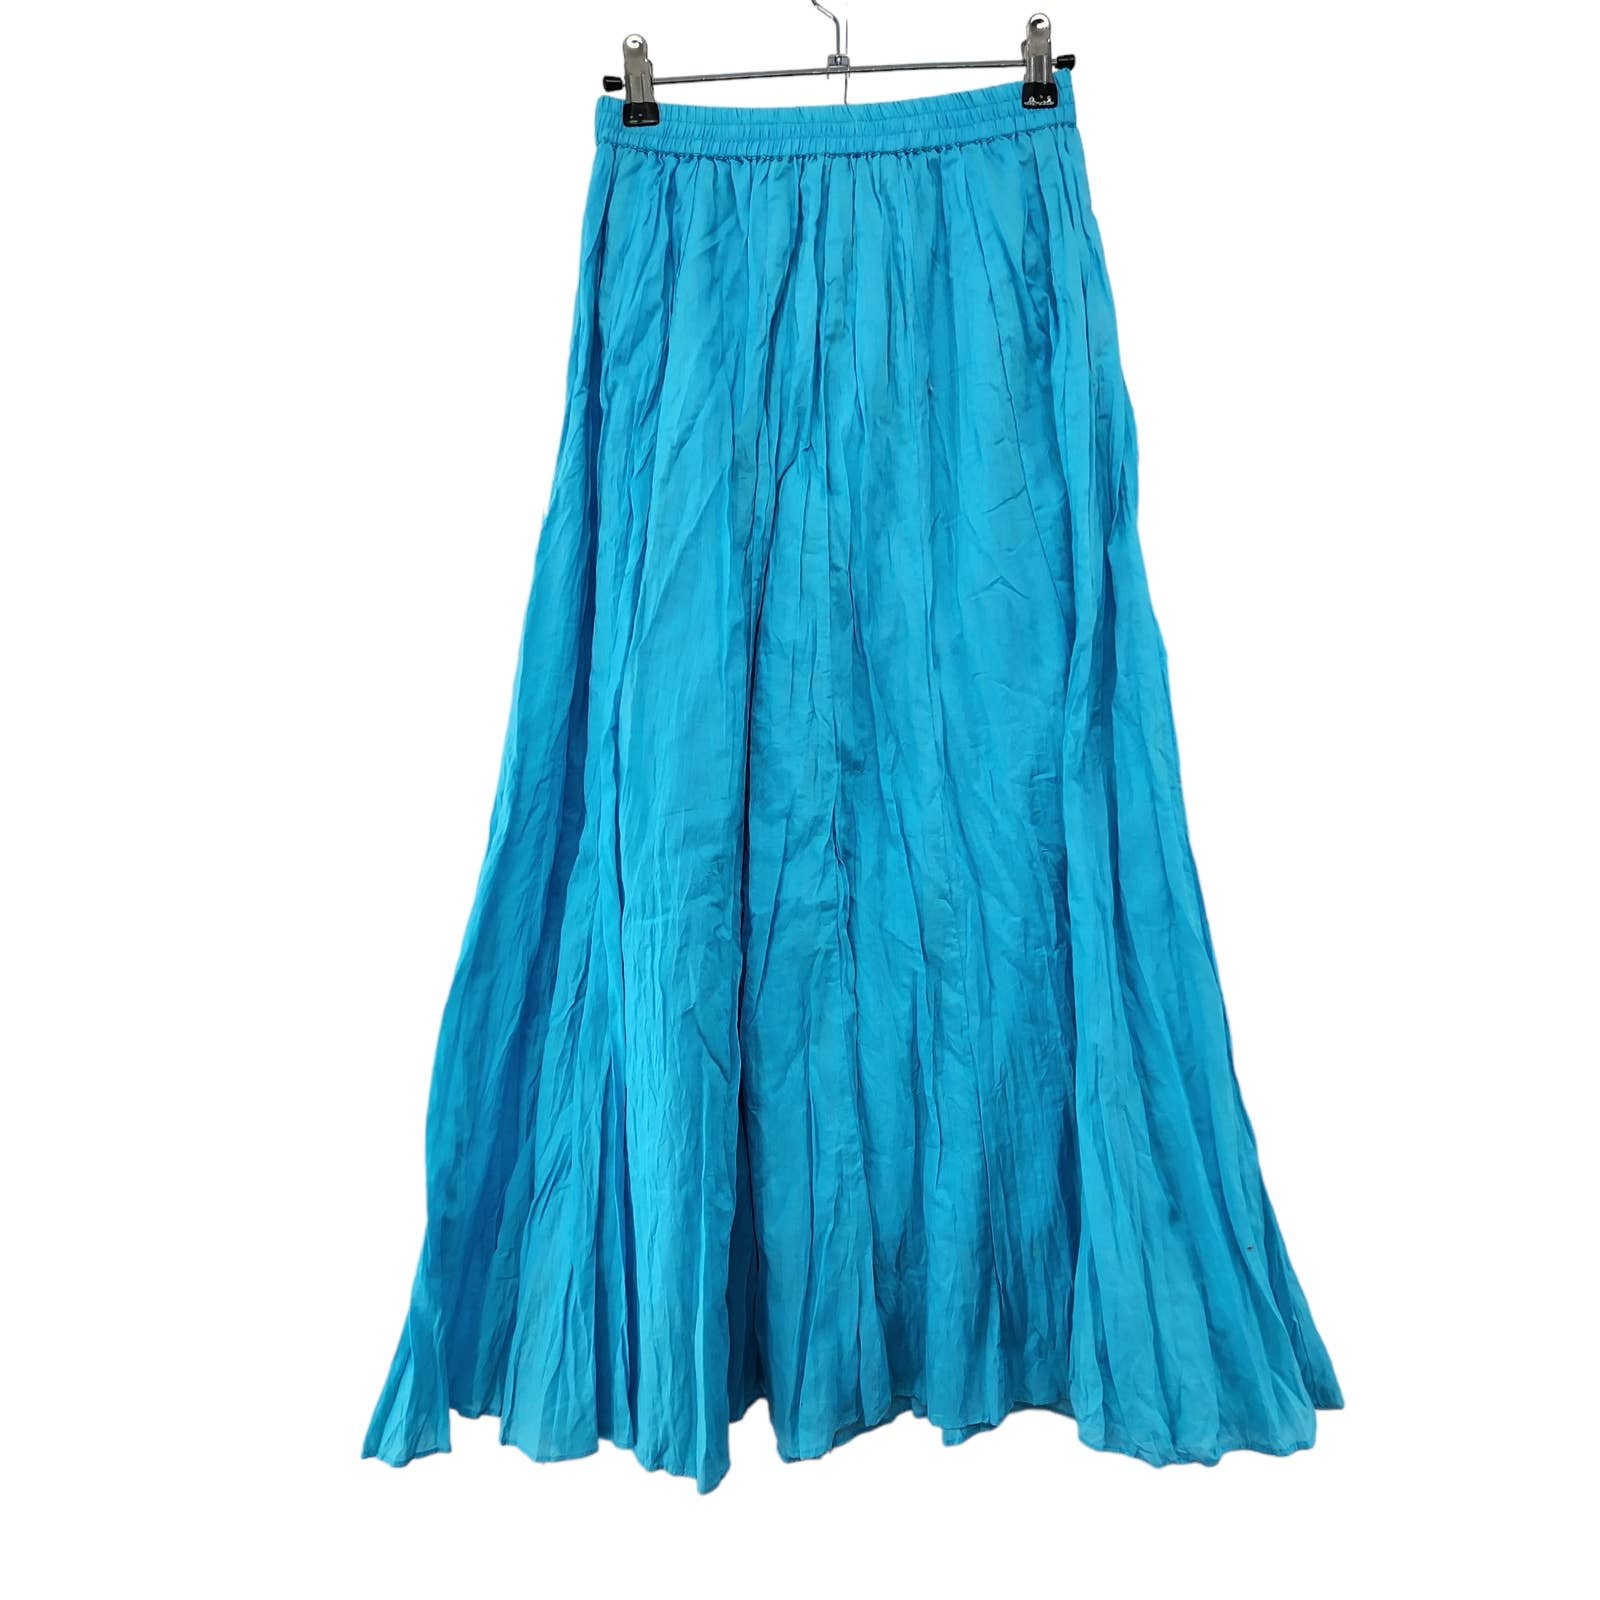 Classic Casual Studio Small Blue Crinkle Pleated A-line